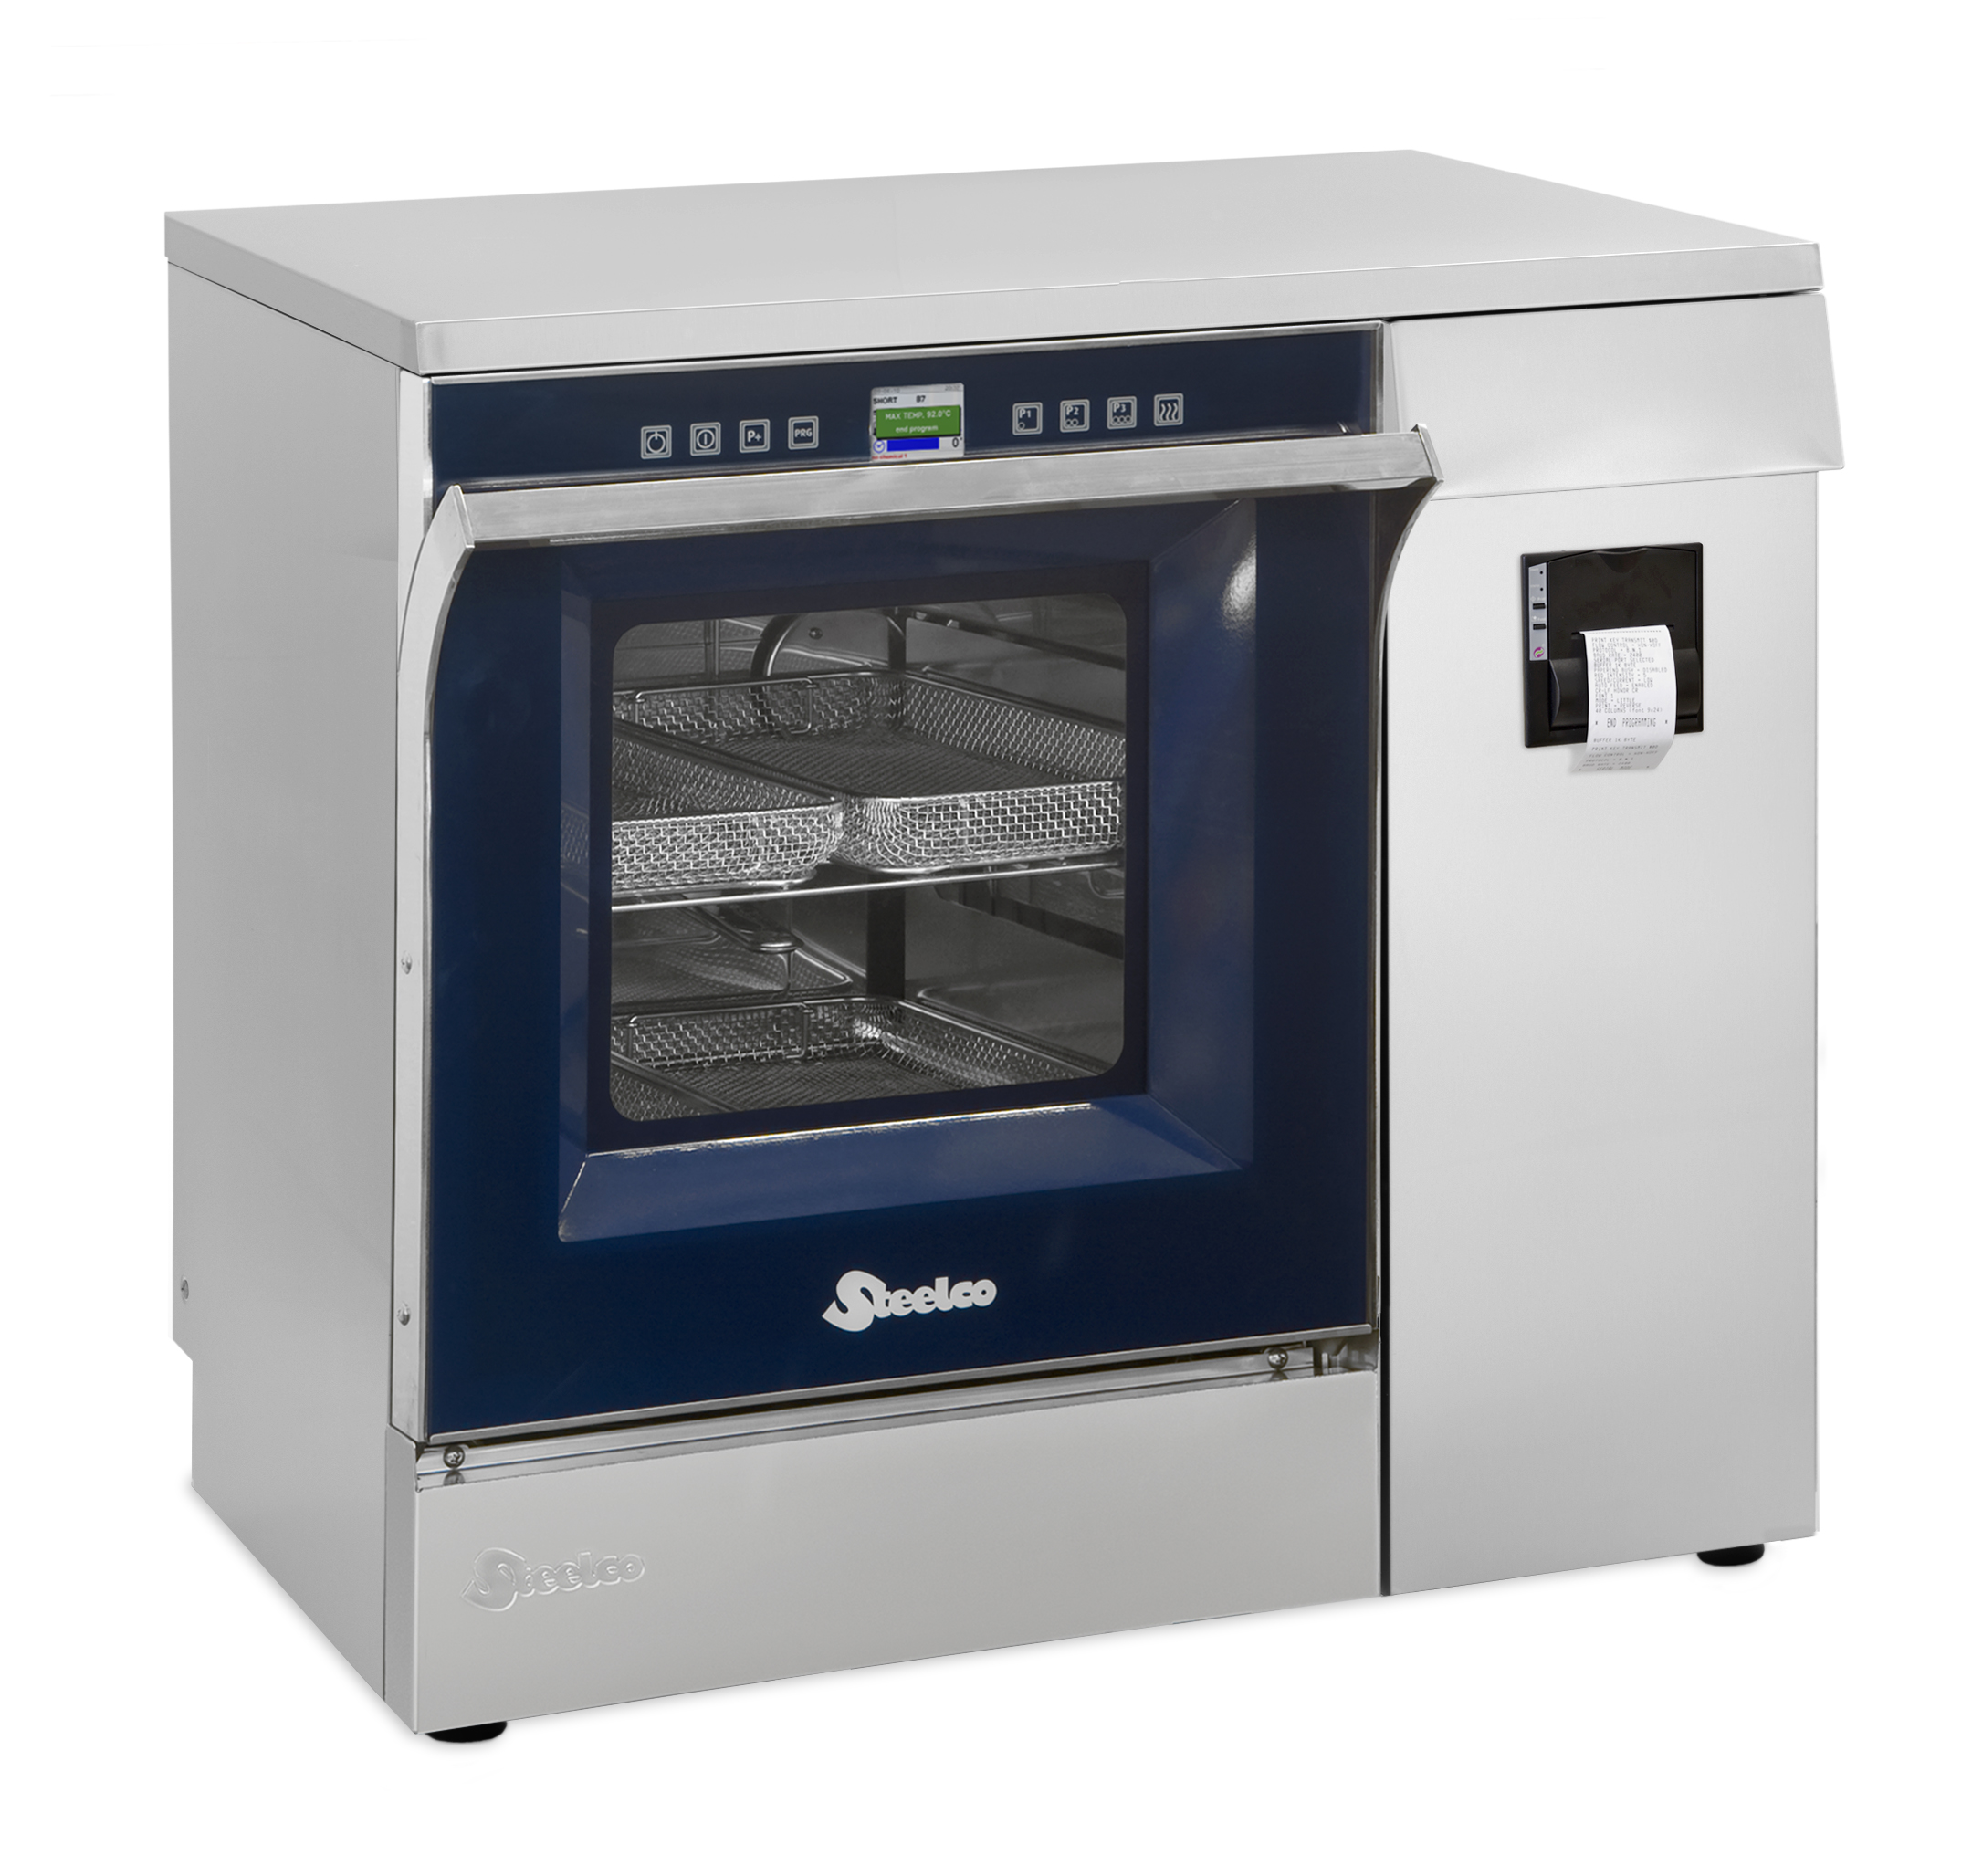 DS 500 CL full glass closed side cabinet.jpg